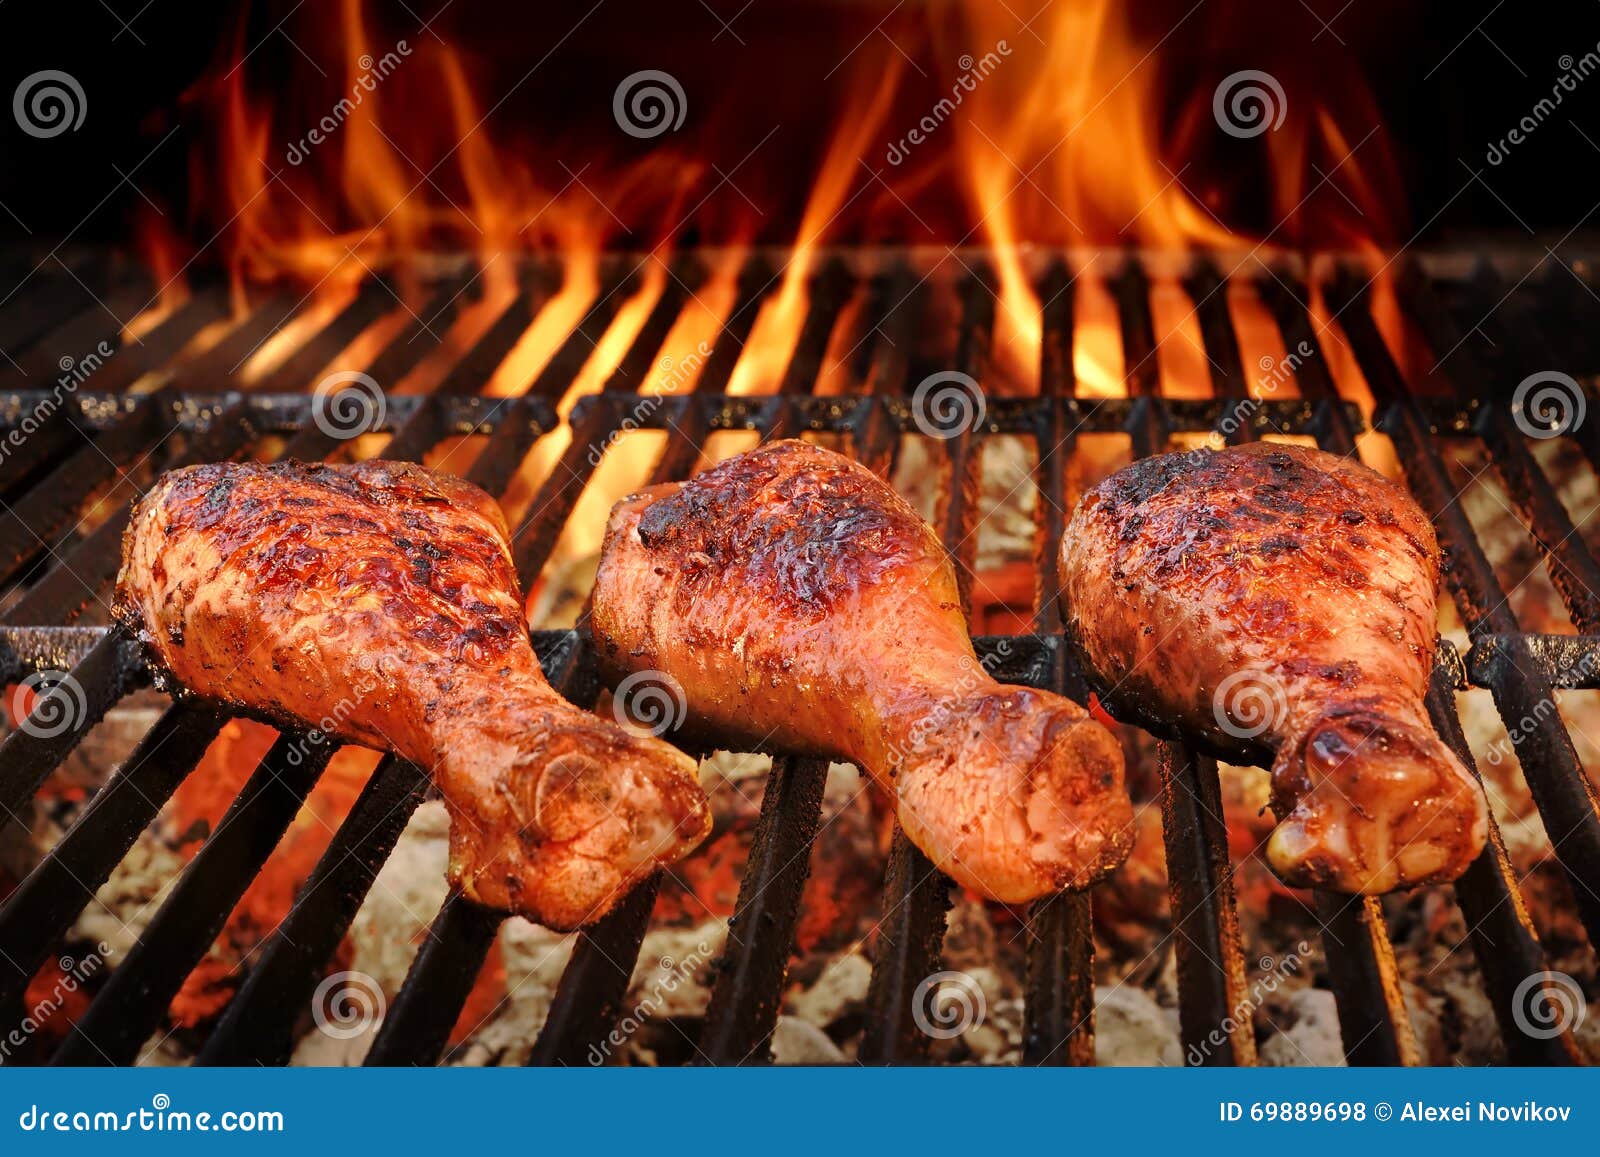 bbq chicken legs roasted on hot charcoal grill